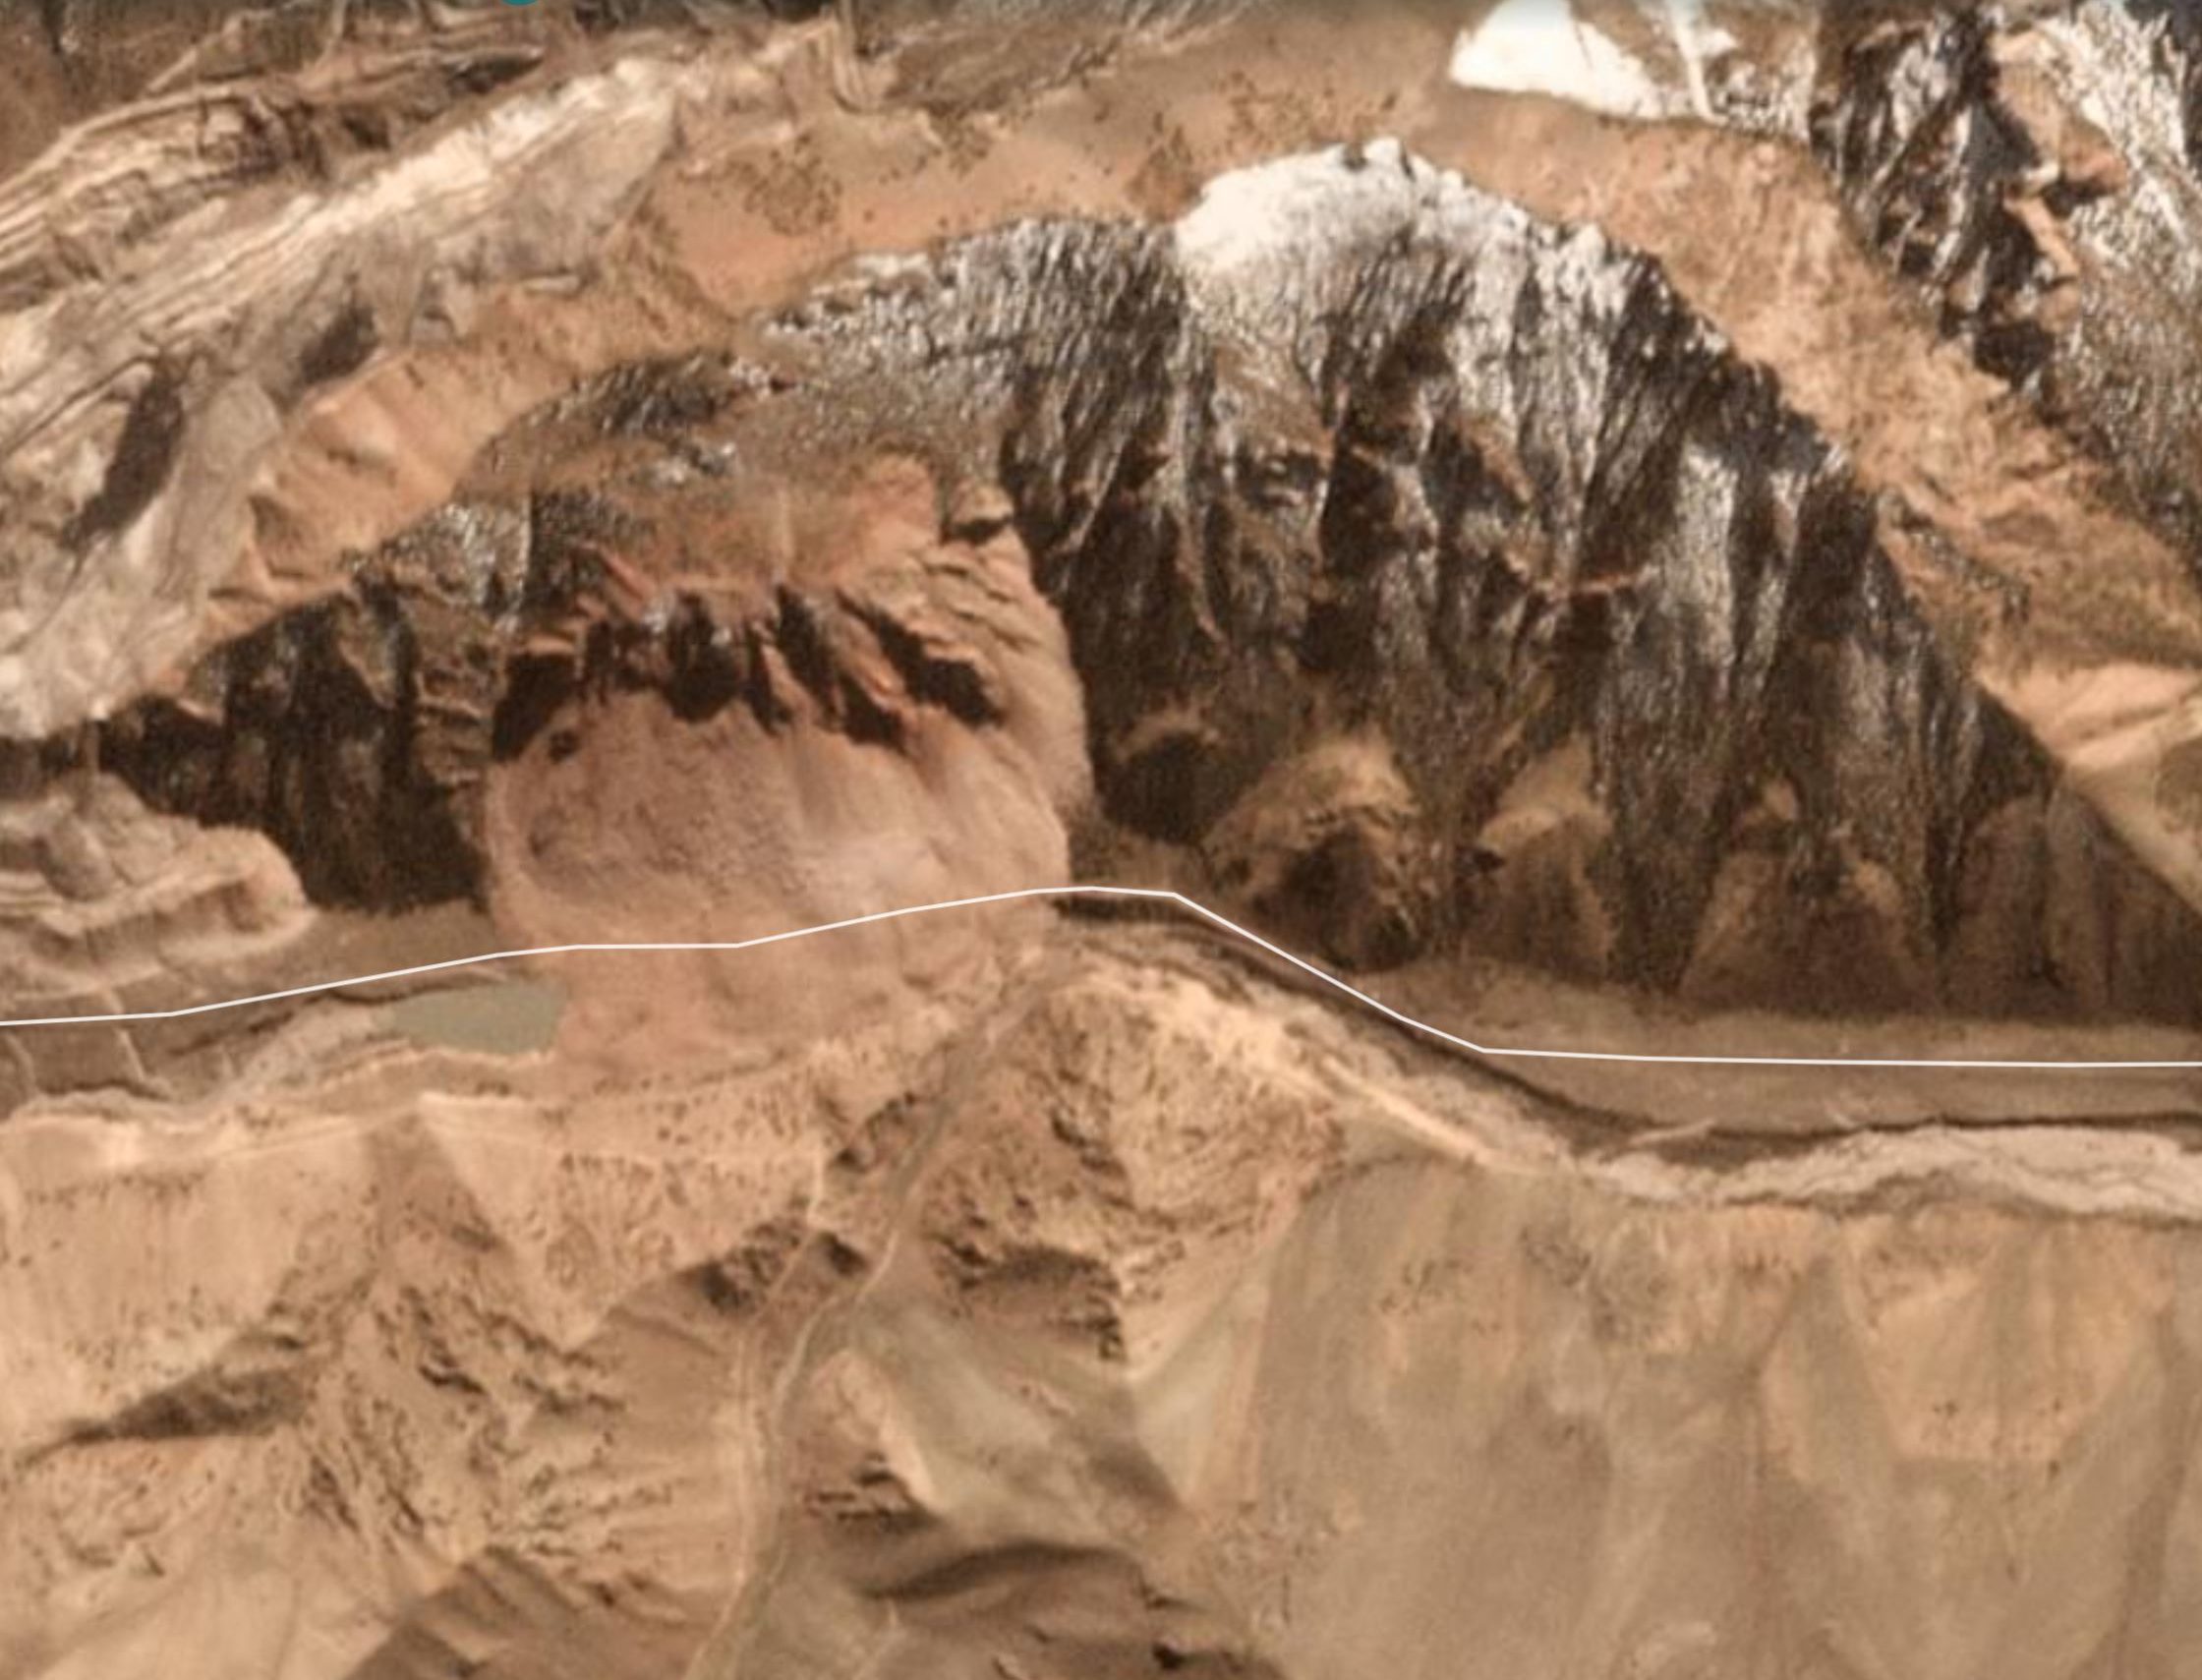 Planet Labs image of the aftermath of the 14 September 2020 landslide at Kara-Keche in Kyrgyzstan.